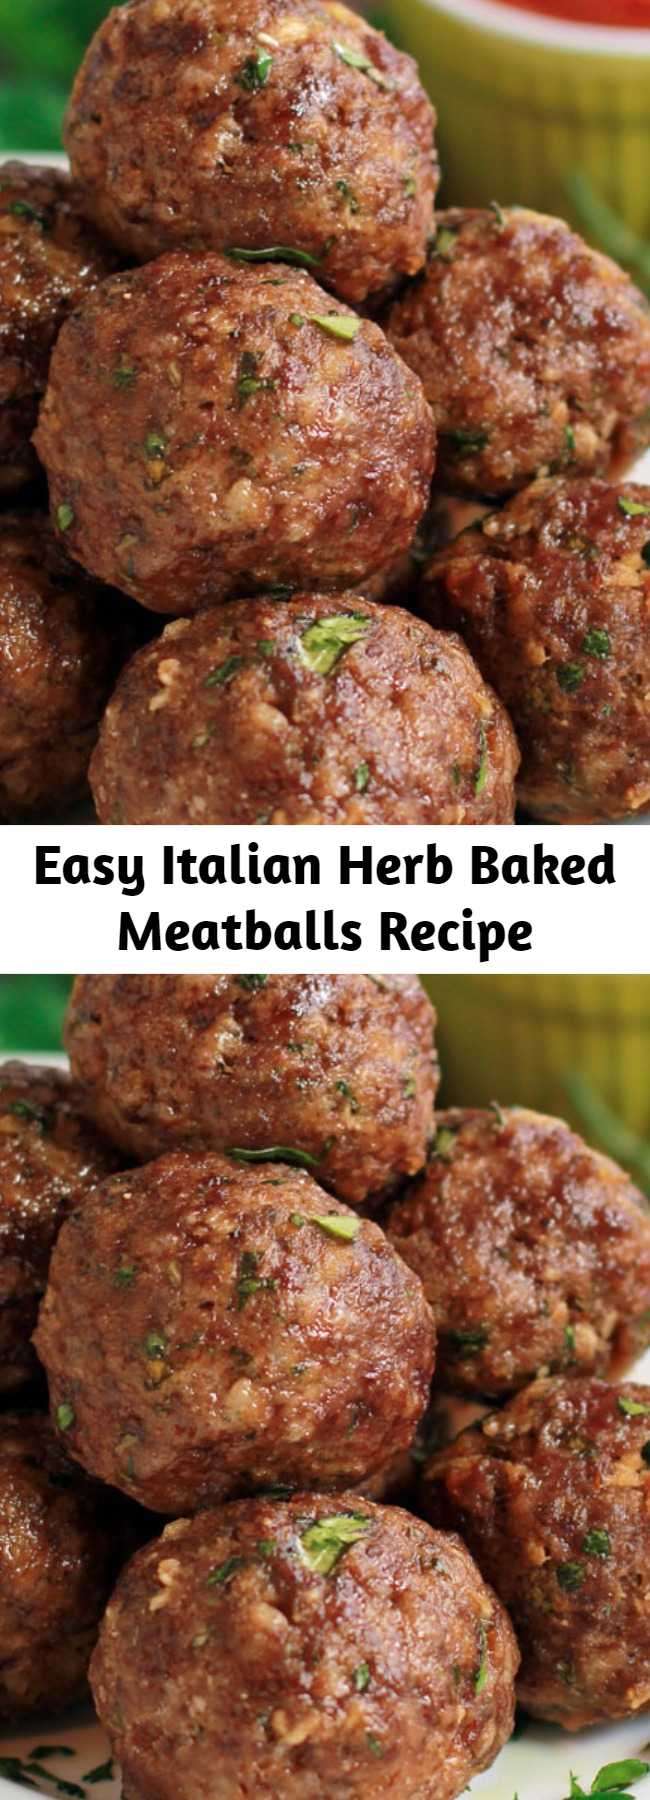 Easy Italian Herb Baked Meatballs Recipe - Best Ever Italian Herb Baked Meatballs are the perfect recipe to learn how to make meatballs the right way. They are truly the most amazing meatballs we have ever had. Our baked meatballs are beautifully browned on the outside and tender and juicy on the inside. #meatballs #Italianmeatballs